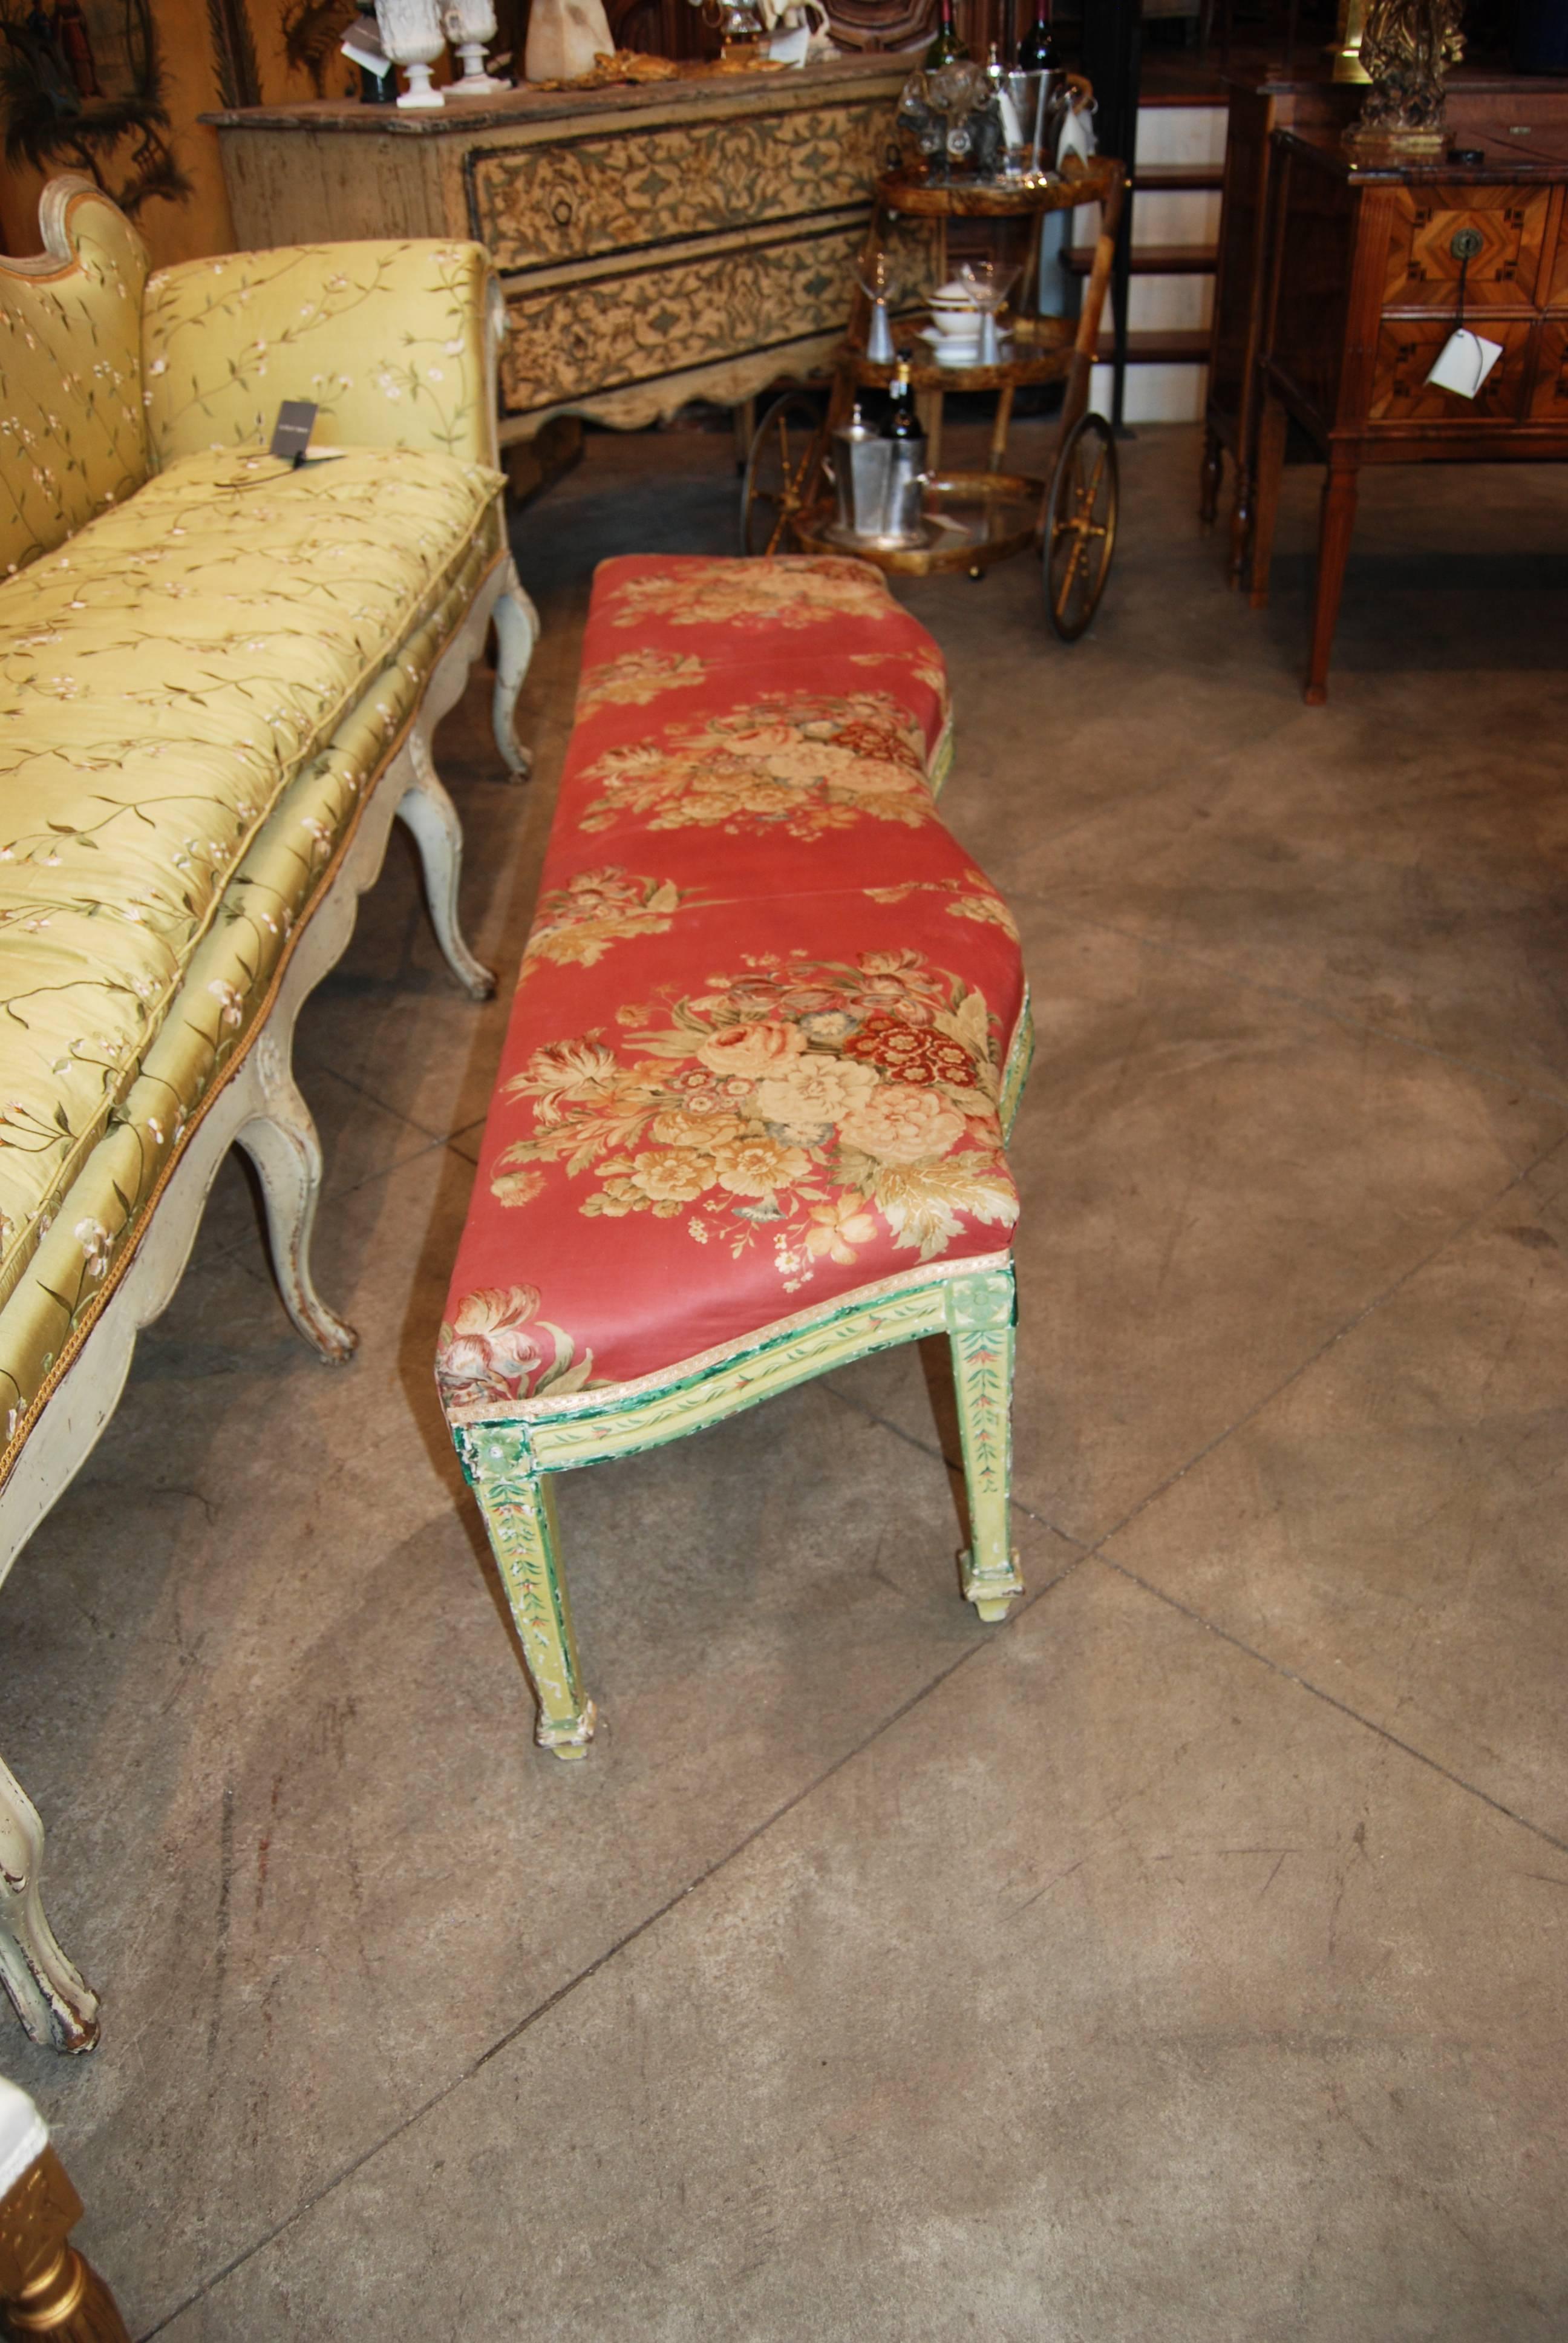 Beautifully shaped and painted Italian bench.